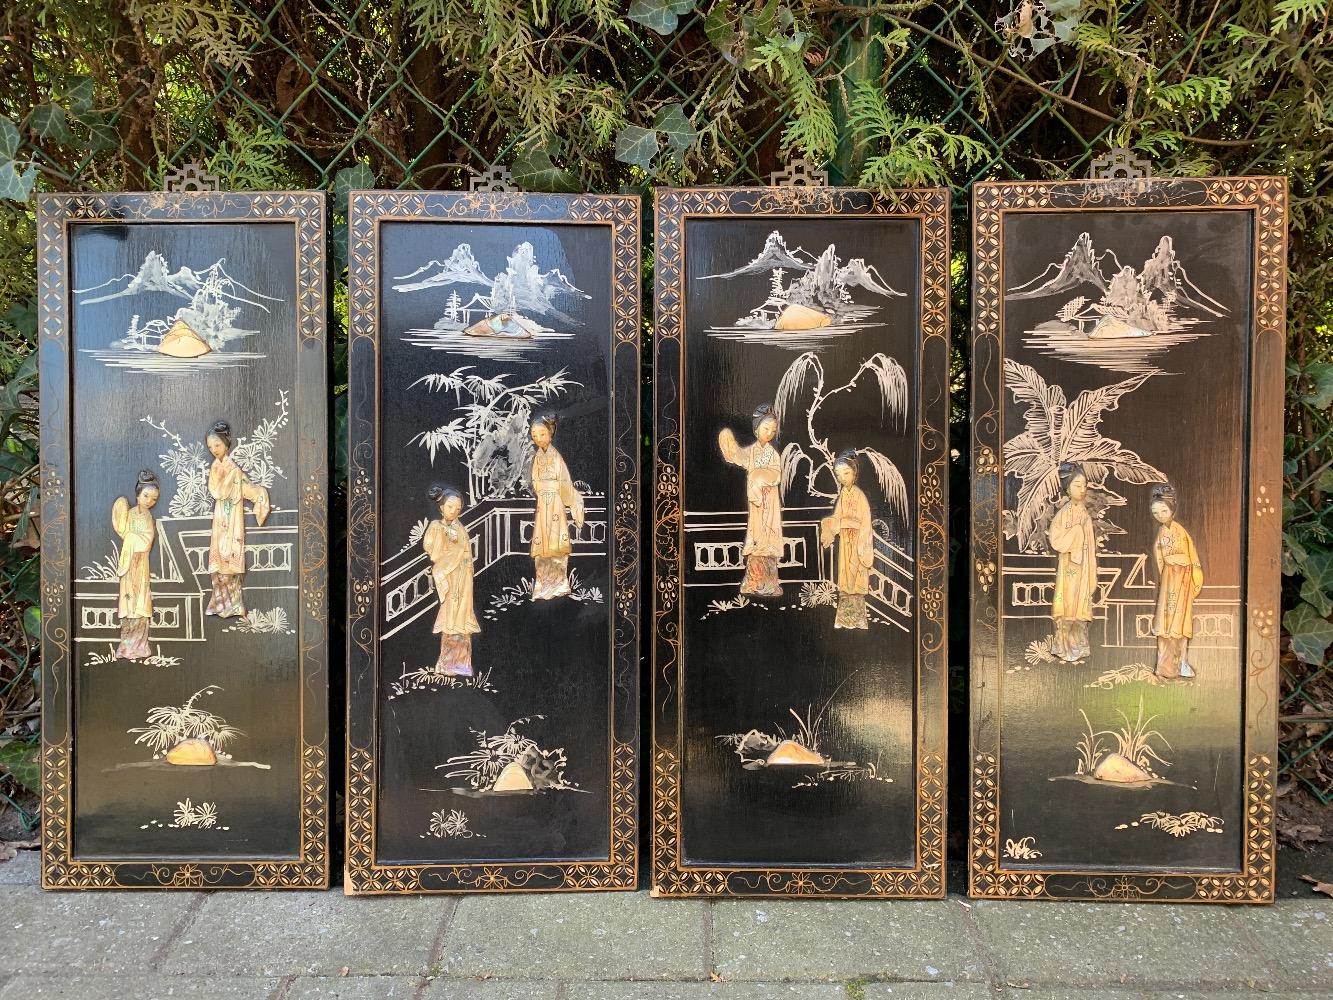 Chinese Wall Panels for Sale at Online Auction